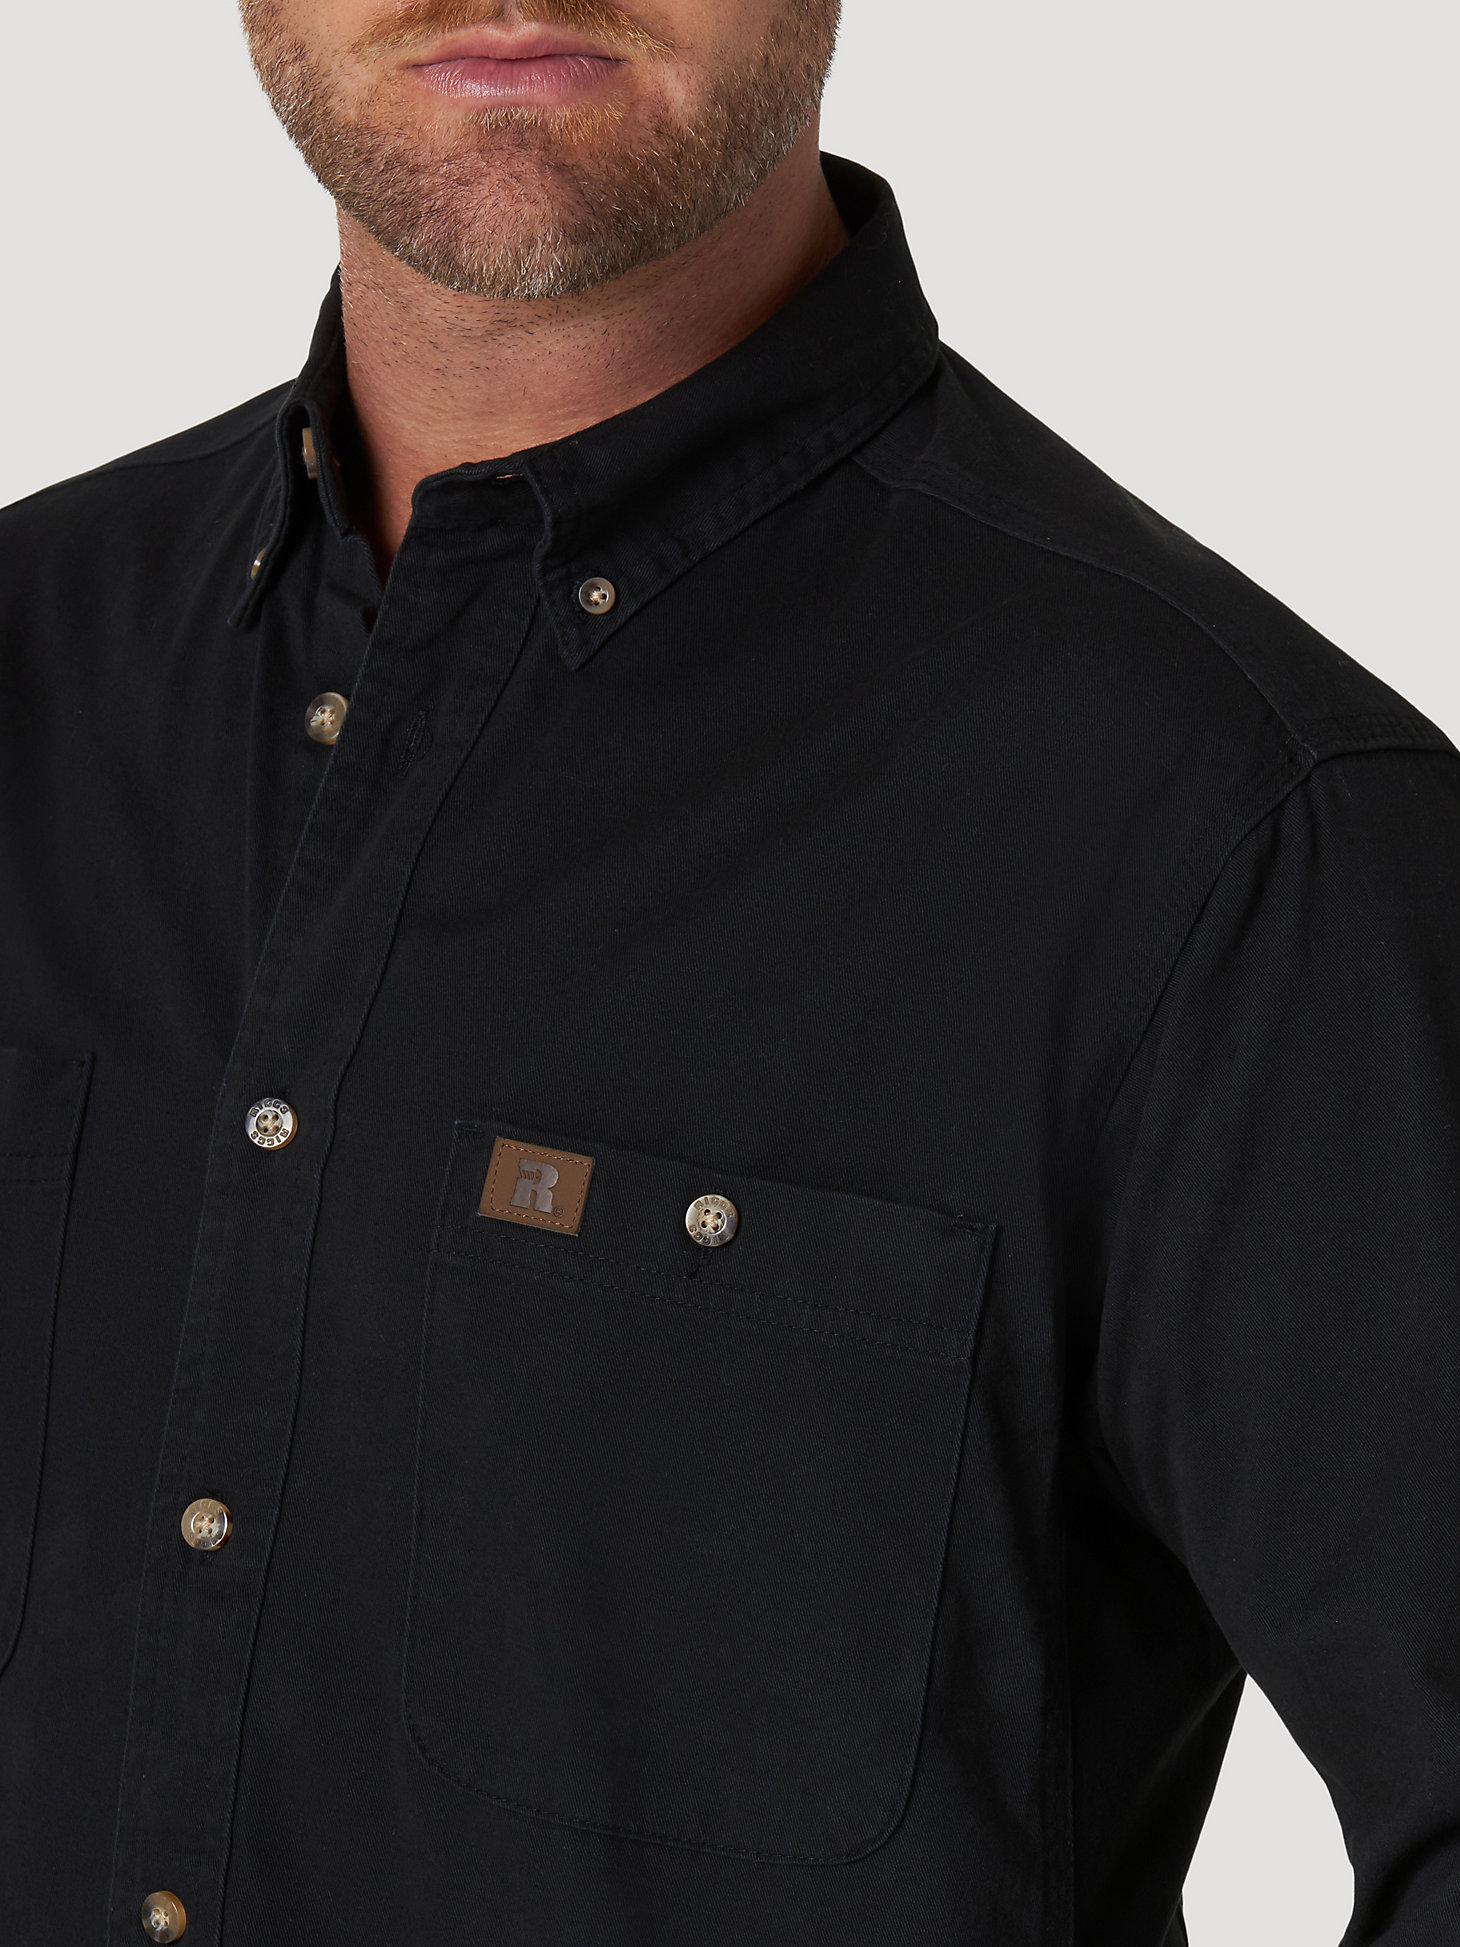 Wrangler® RIGGS Workwear® Long Sleeve Button Down Solid Twill Work Shirt in Black alternative view 2